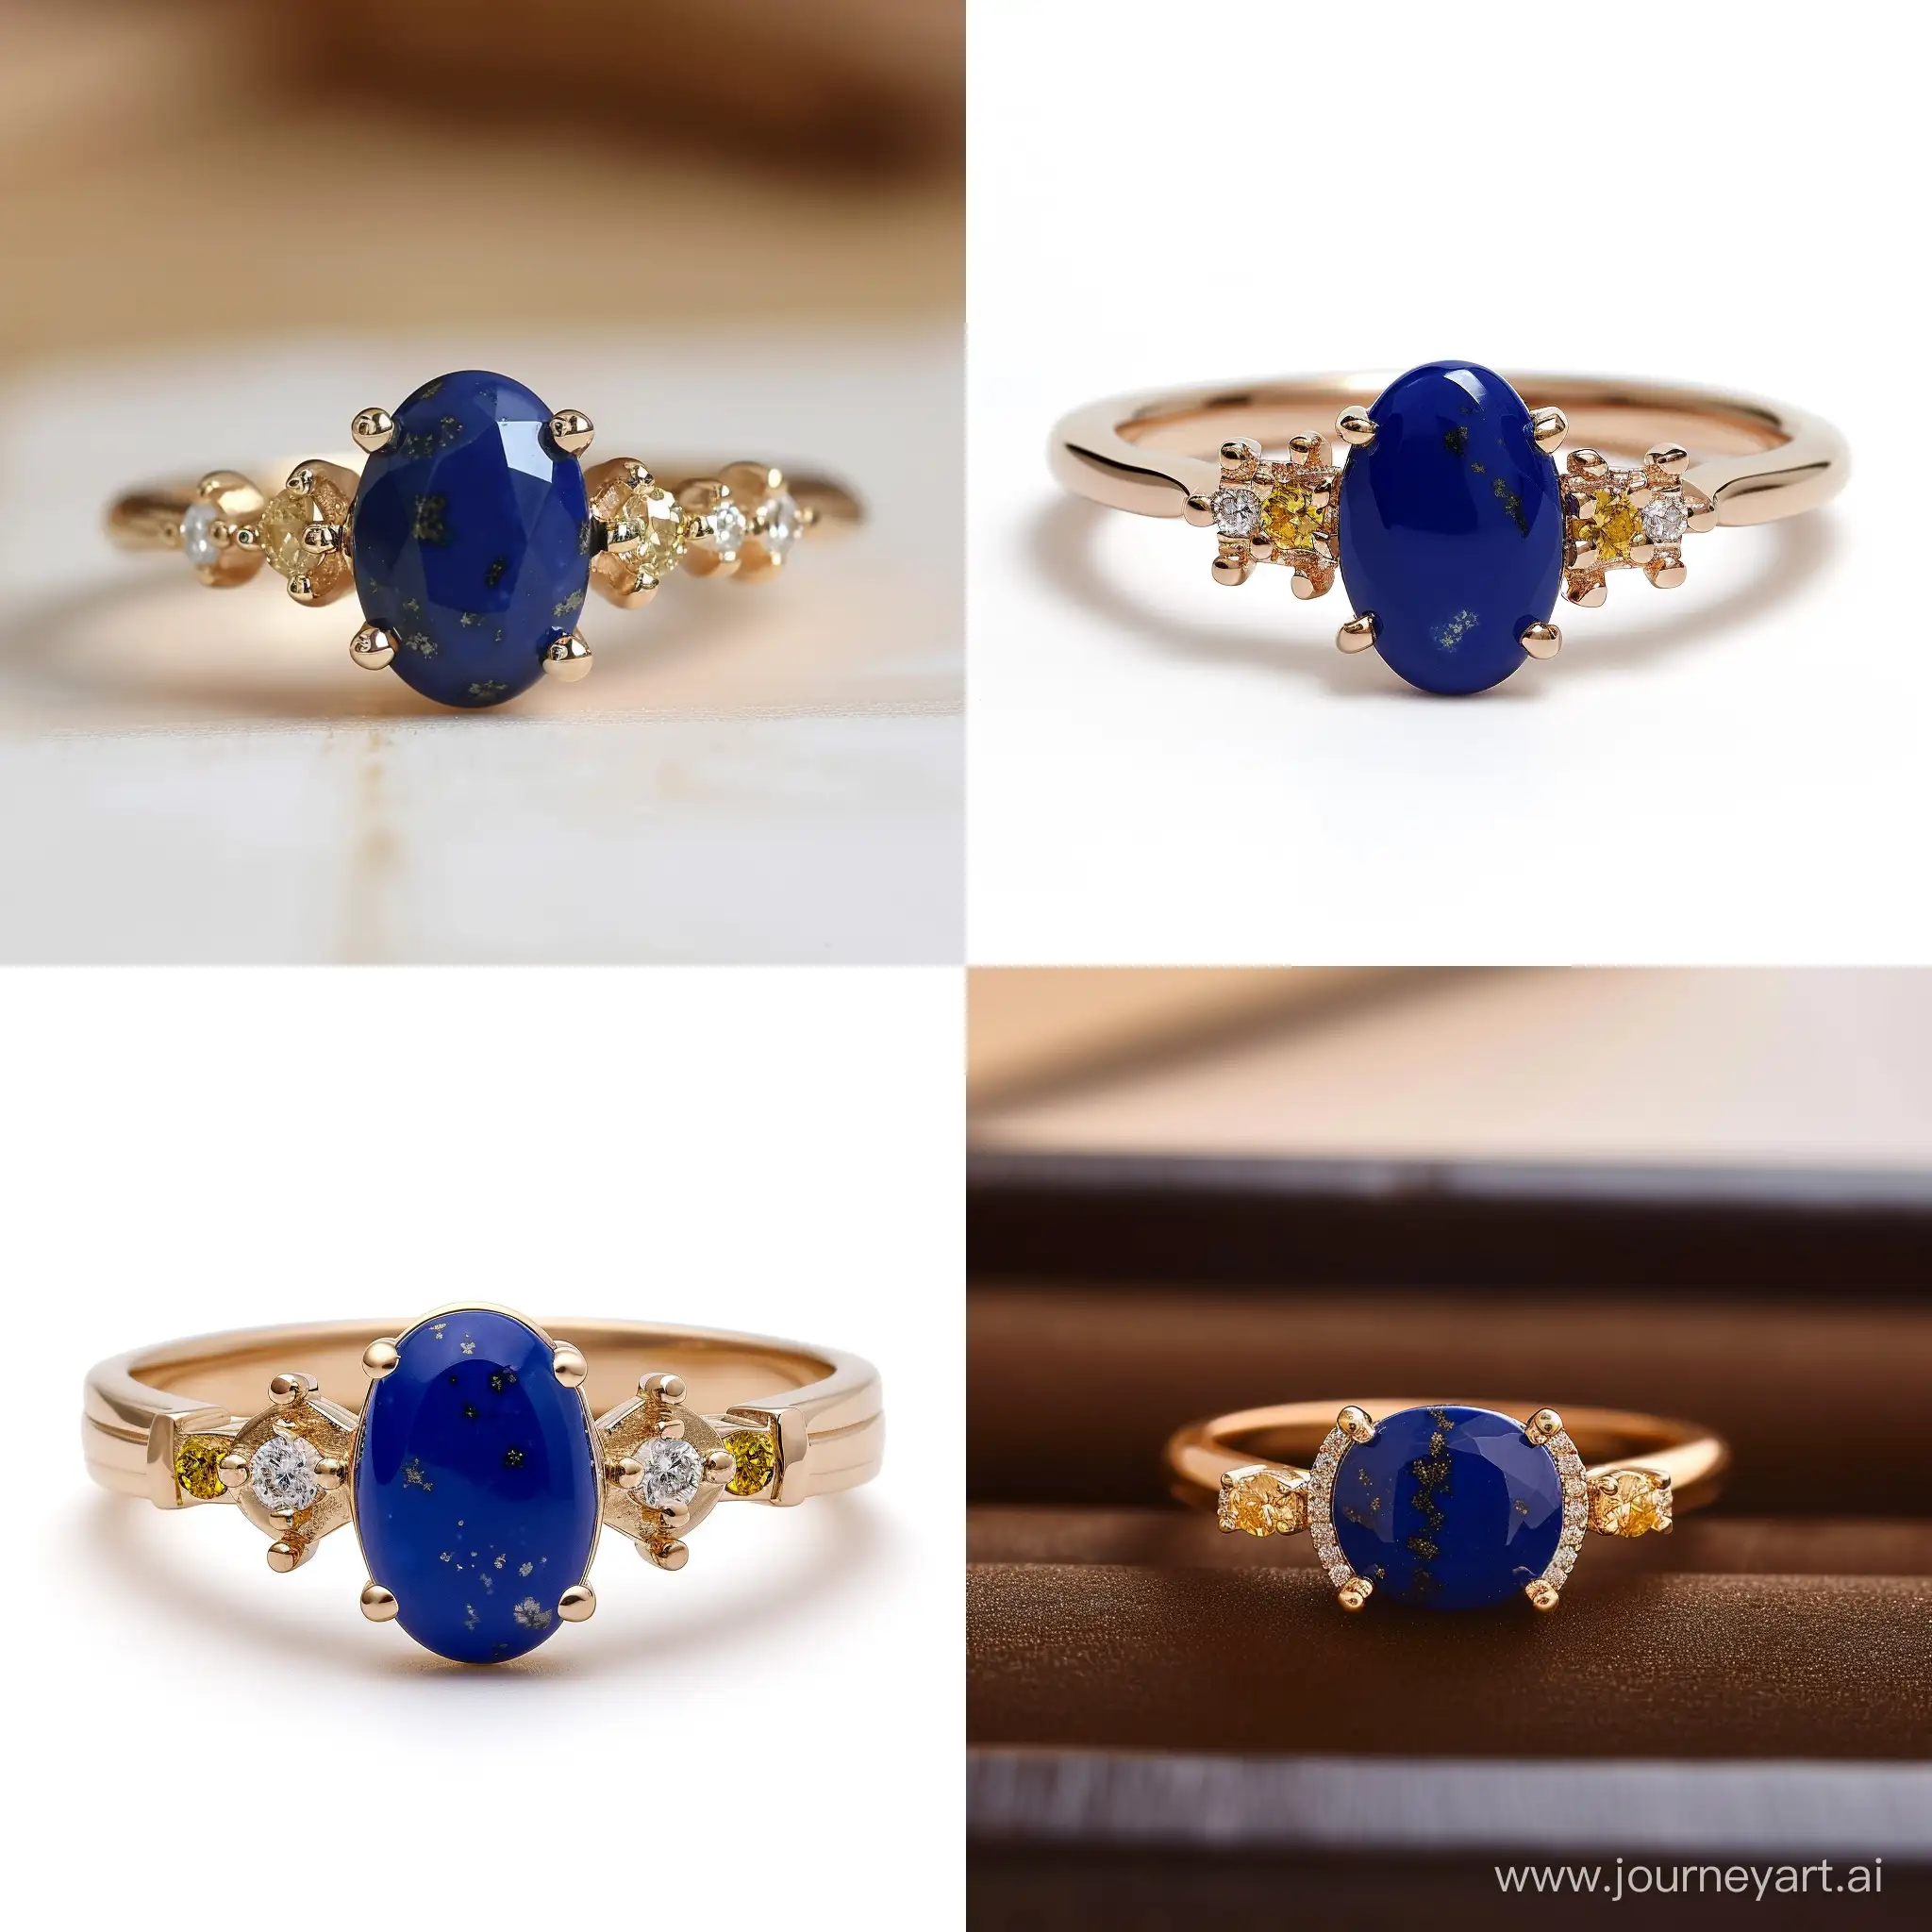 /imagine prompt gold ring with ovale cut lapis lazuli 2cm long and 1.5 cm wide and with small yellow diamonds on each side art déco style